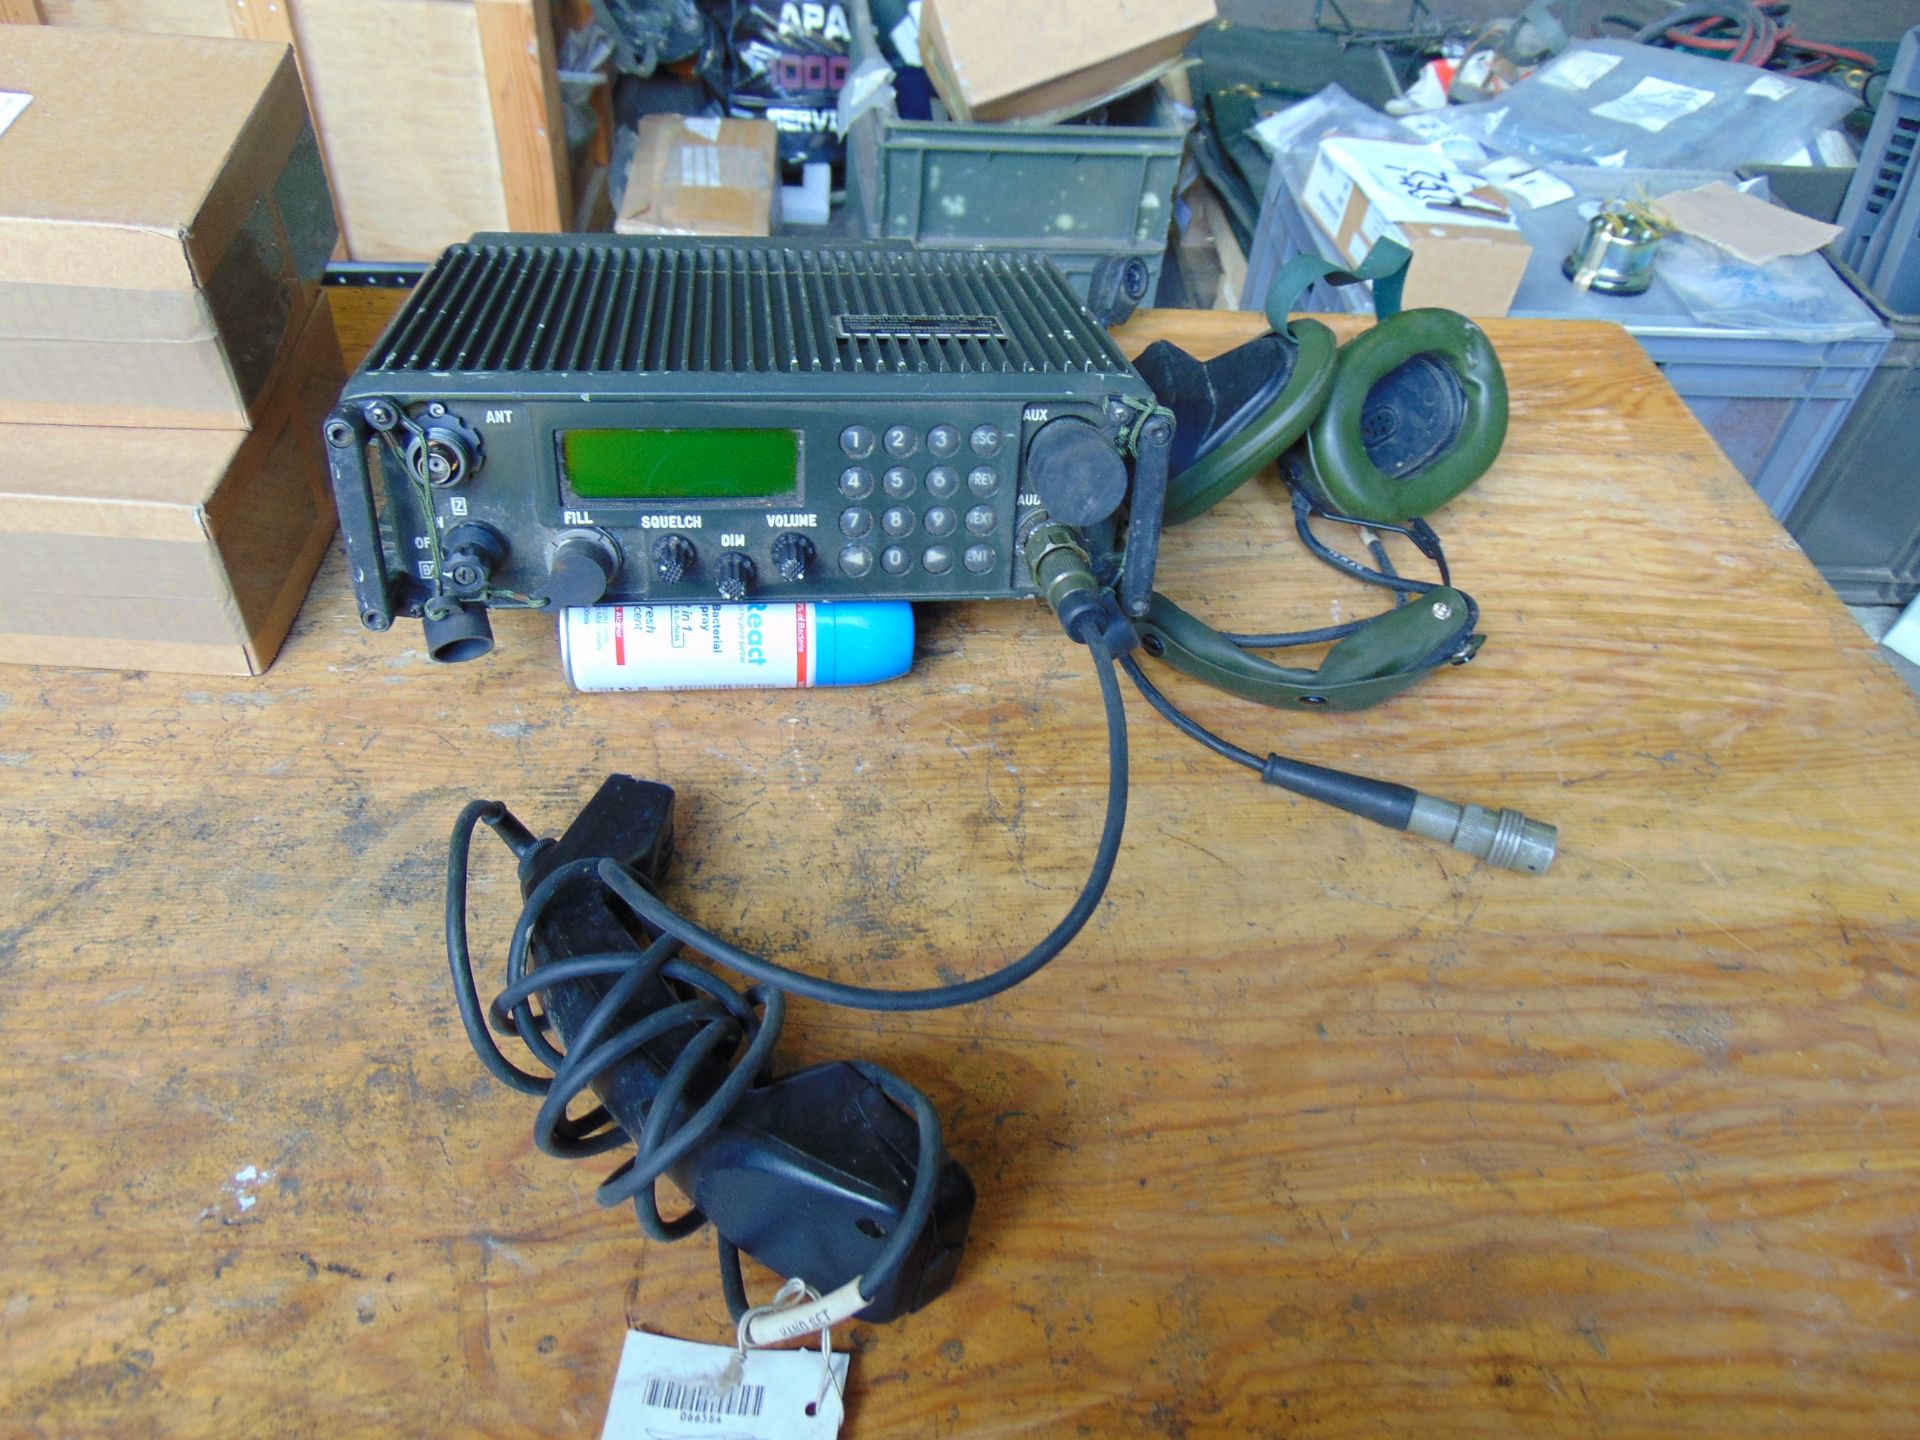 Bowman / Clansman Rayheon RT346 Transmitter Receiver c/w 2 New Batteries, Handset and Headset - Image 4 of 5